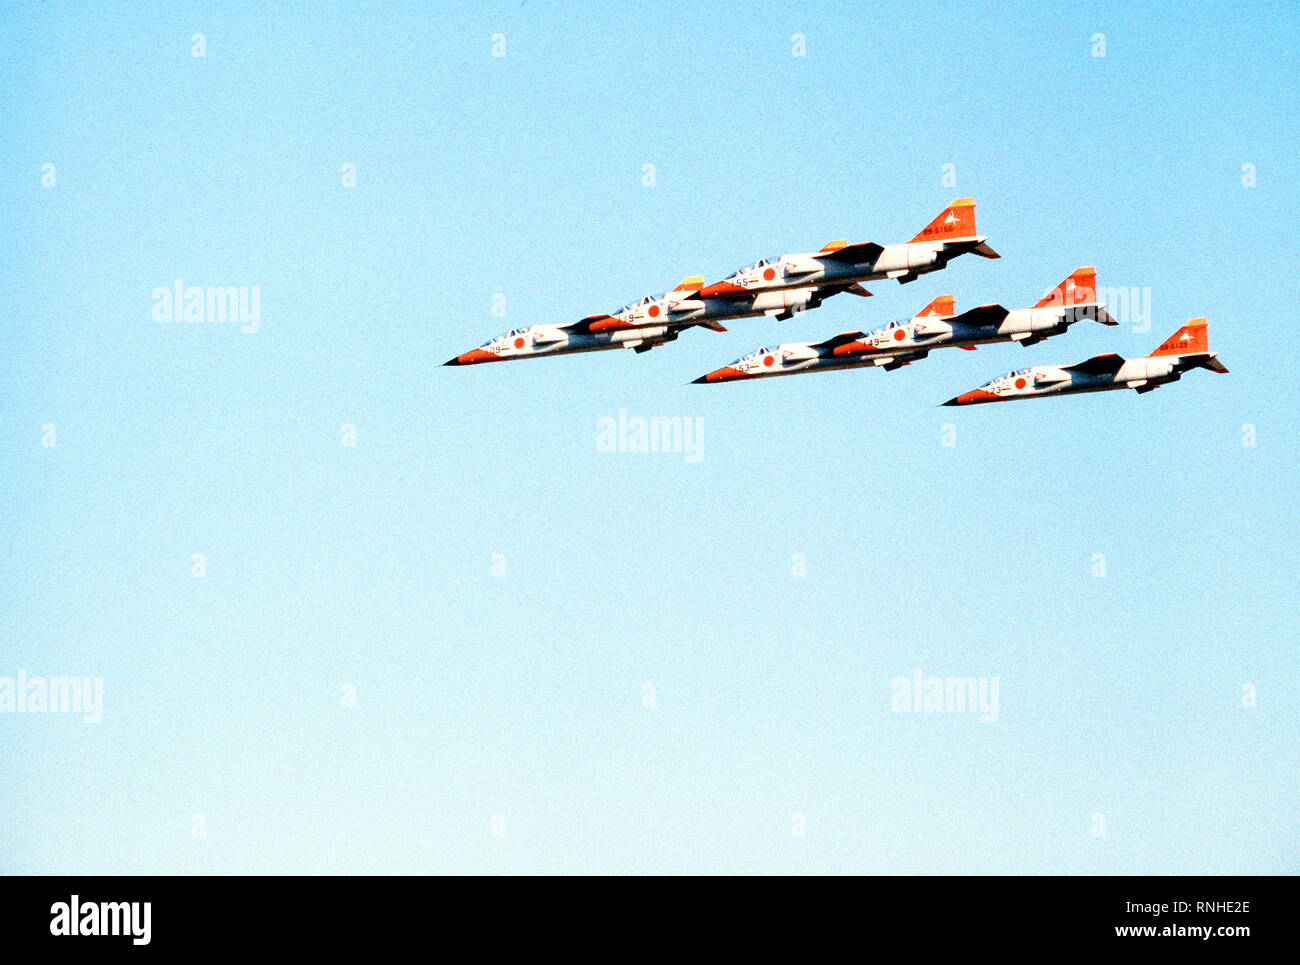 1981 - A left side view of six T-2 Mitsubishi jet trainer aircraft flying in formation during an air show.  Within the next year, the T-2 aircraft will replace the F-86F Sabre aircraft that are presently flown by the Japanese Blue Impulse Precision Flying Team. Stock Photo